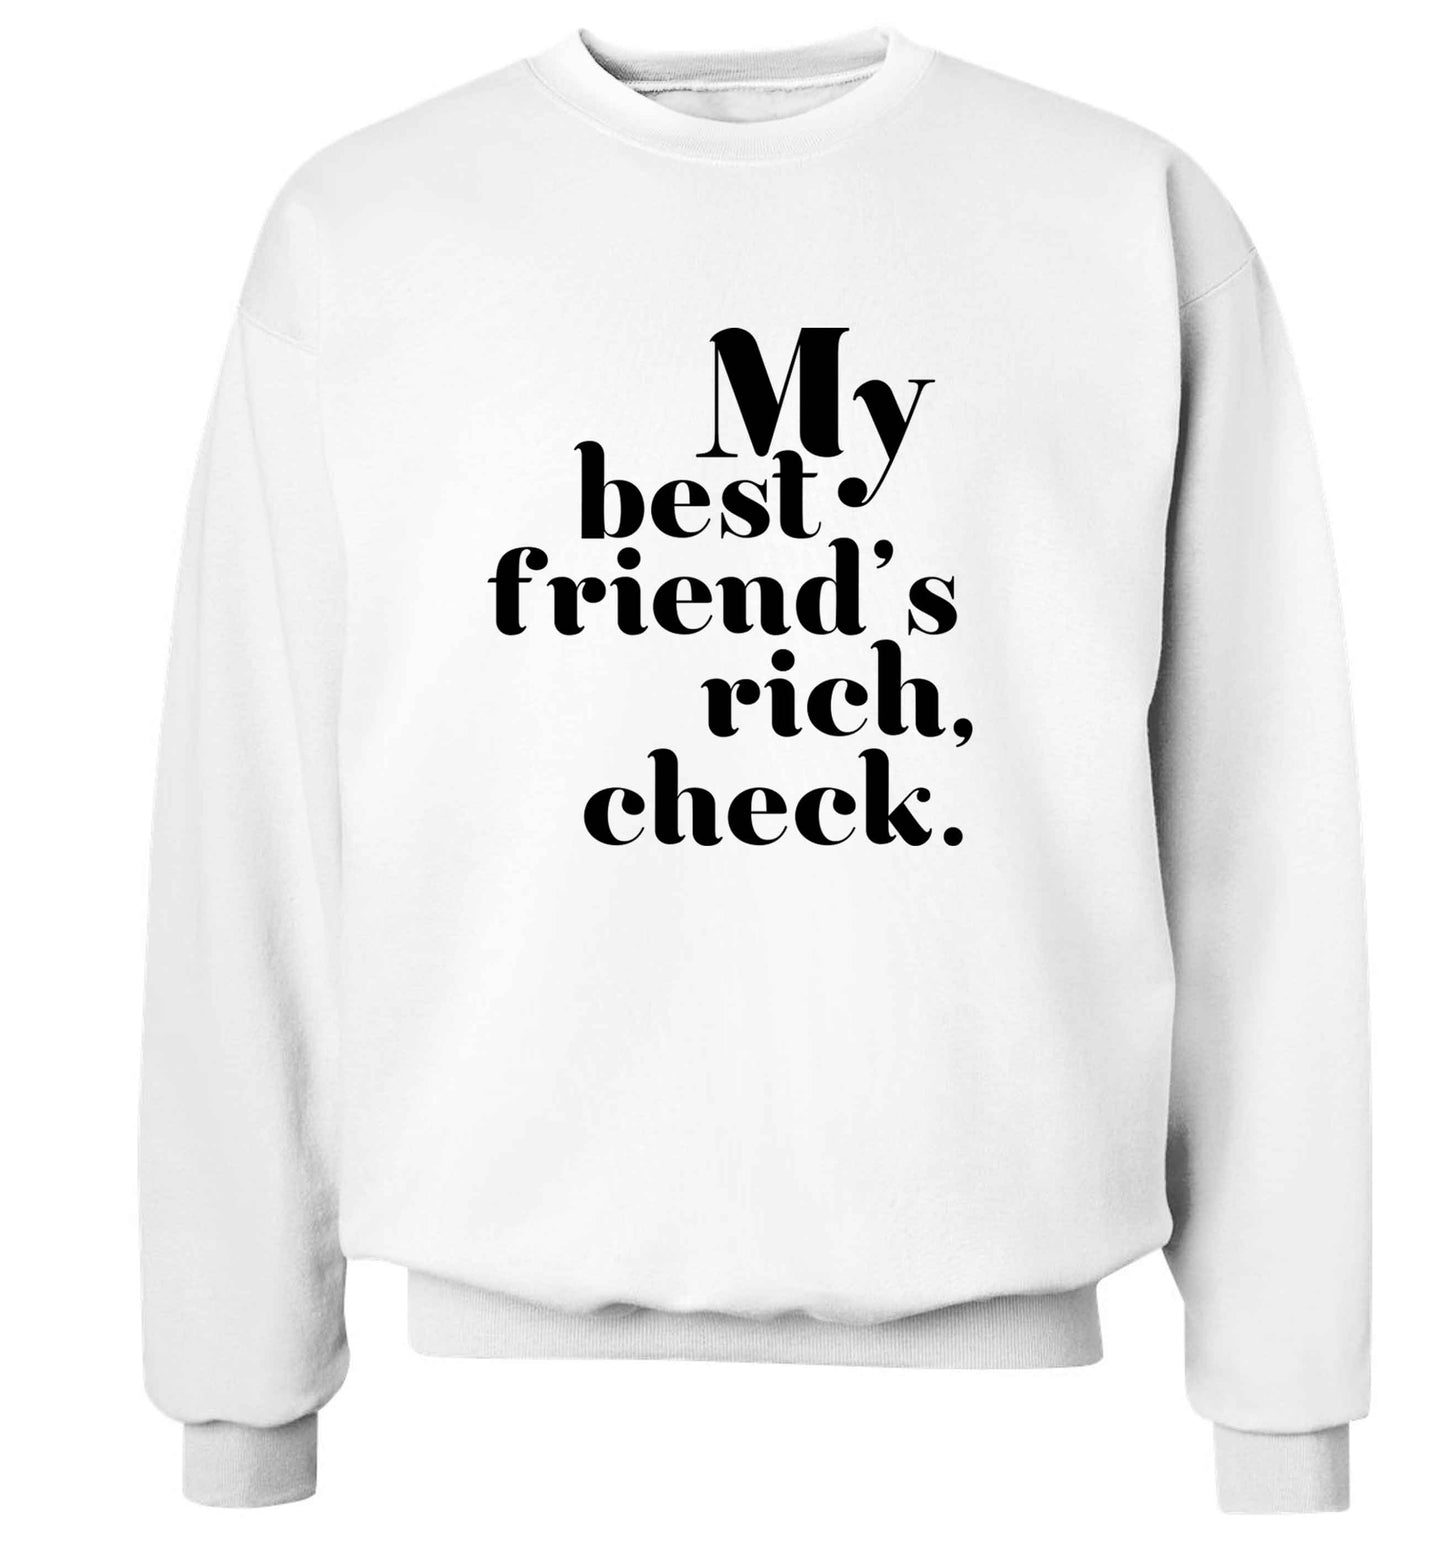 Got a rich best friend? Why not ask them to get you this, just let us  know and we'll tripple the price ;)  adult's unisex white sweater 2XL